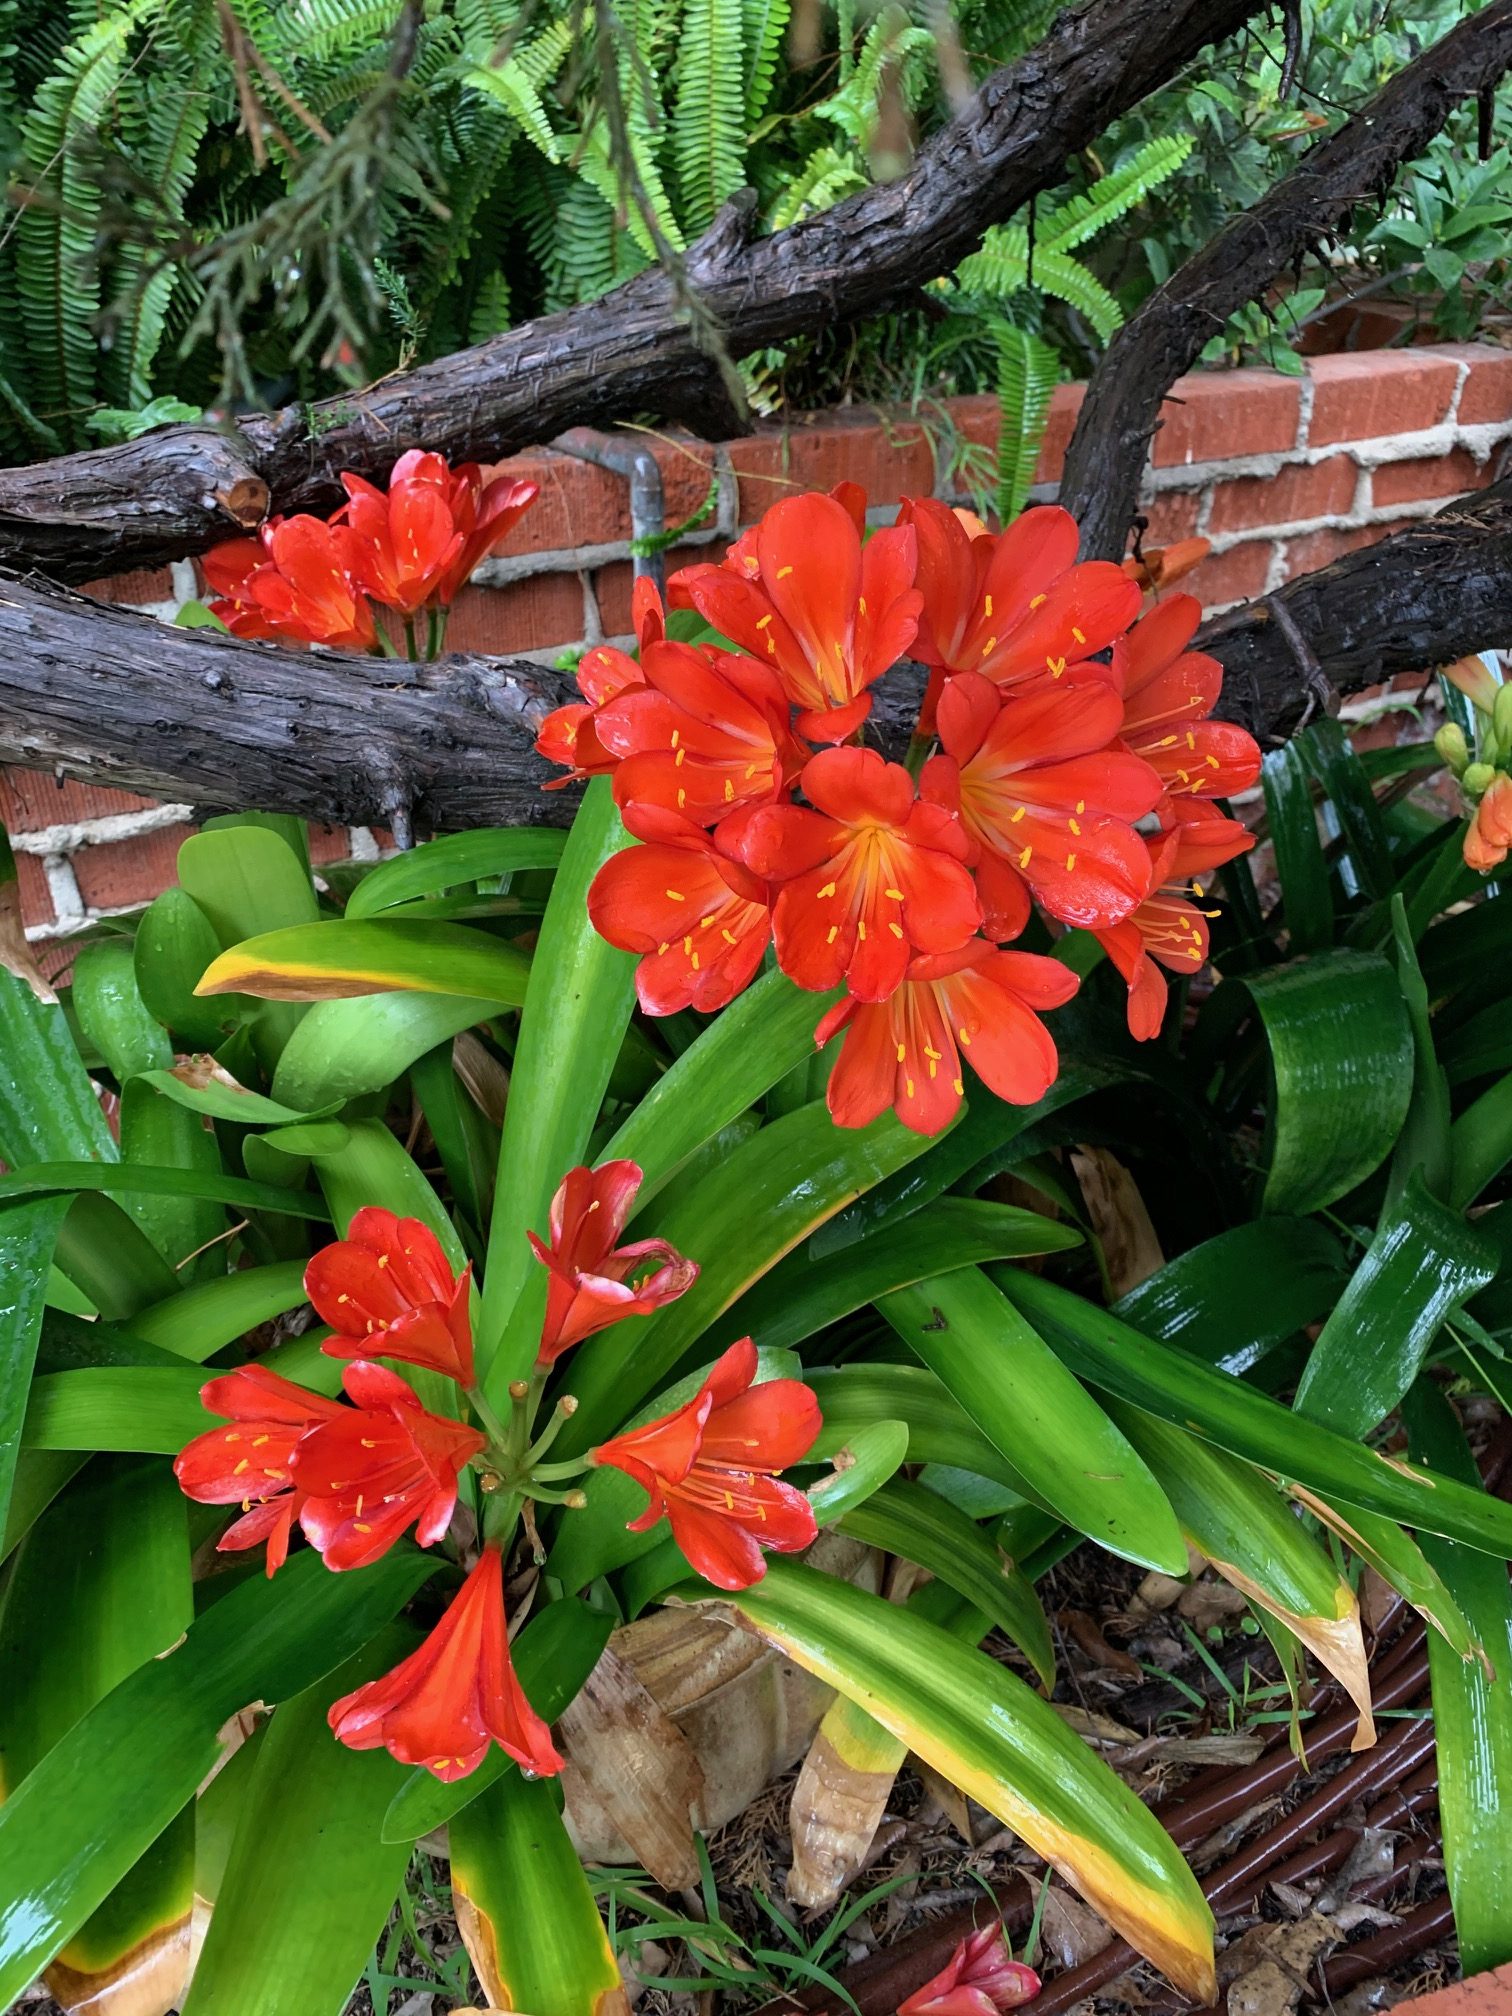 The South American Clivia plant in my yard is in full bloom! Photo: Jim Mumford